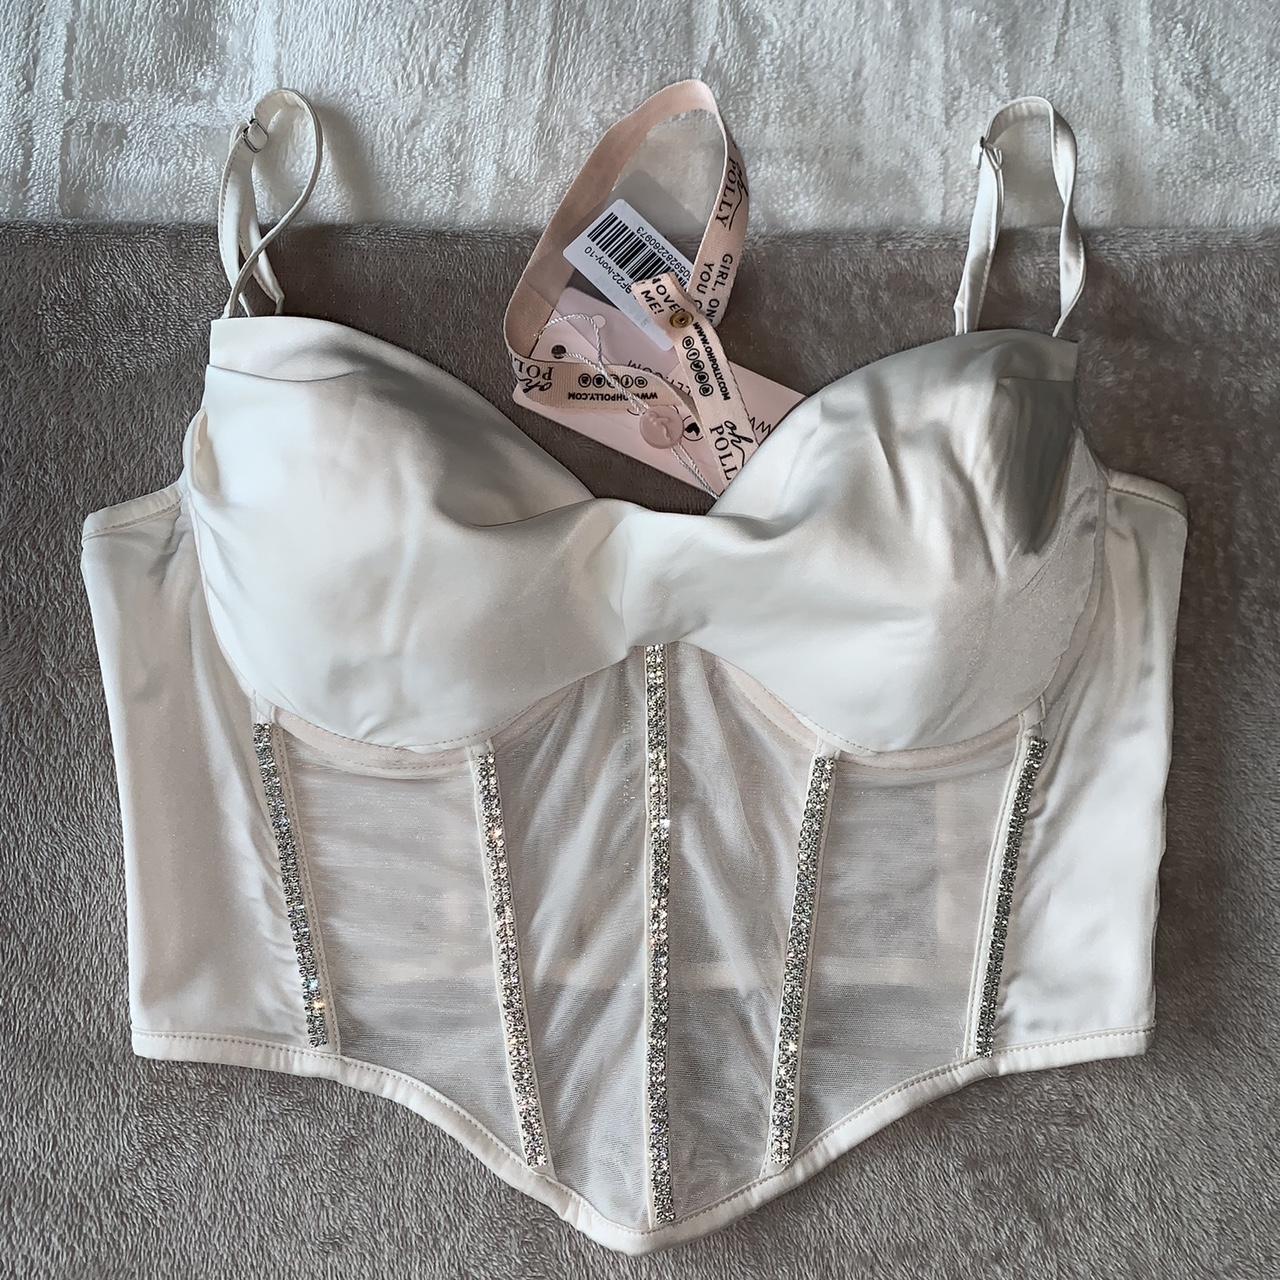 Brand new ivory Ohpolly corset top #ohpolly #corset... - Depop